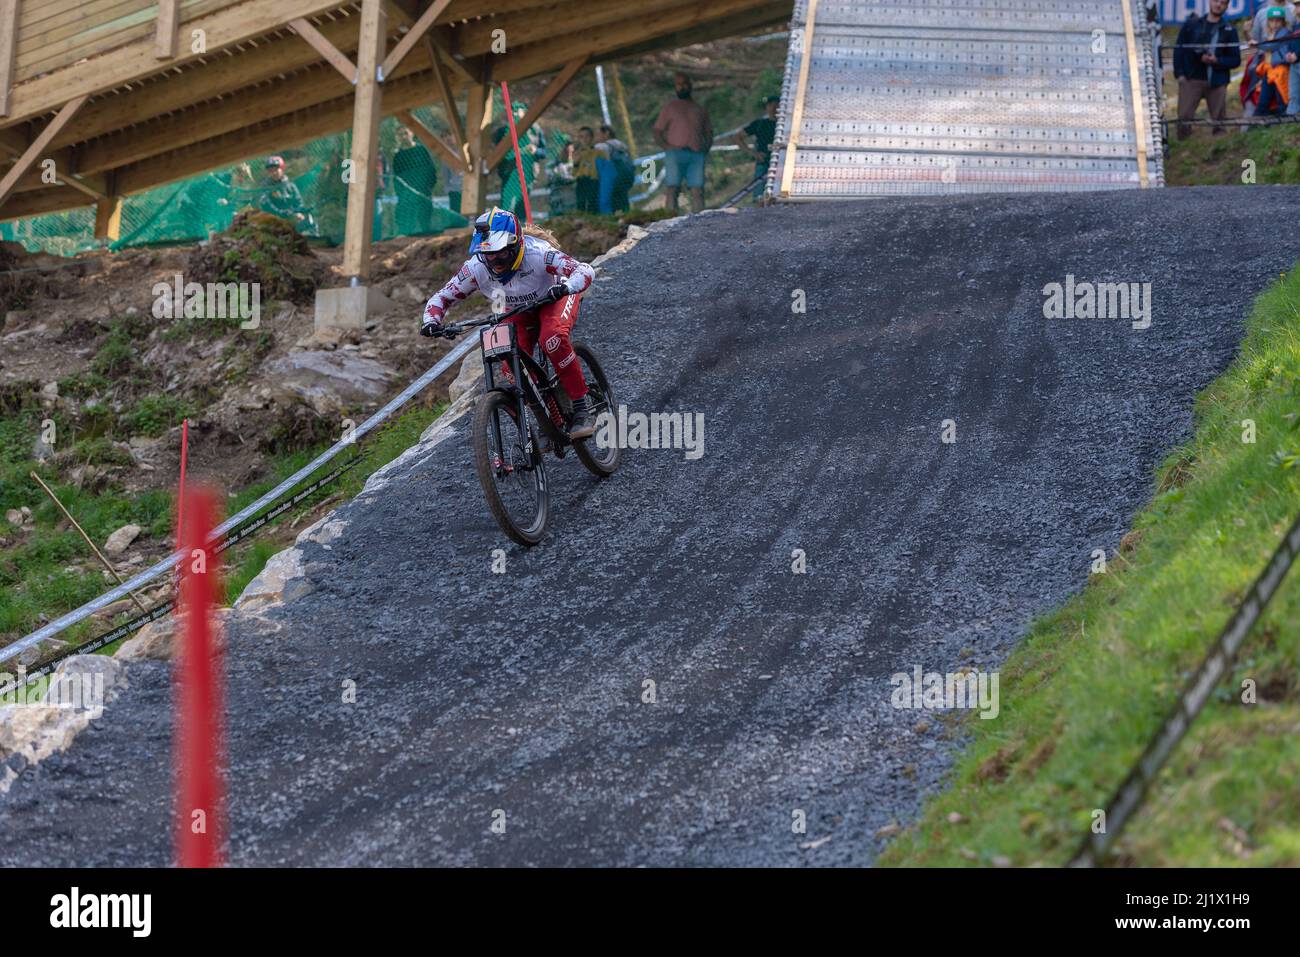 Lourdes, France : 2022 March 27 : HOLL Valentina AUT competes during the UCI Mountain Bike Downhill World Cup 2022 race at the Lourdes, France. Stock Photo